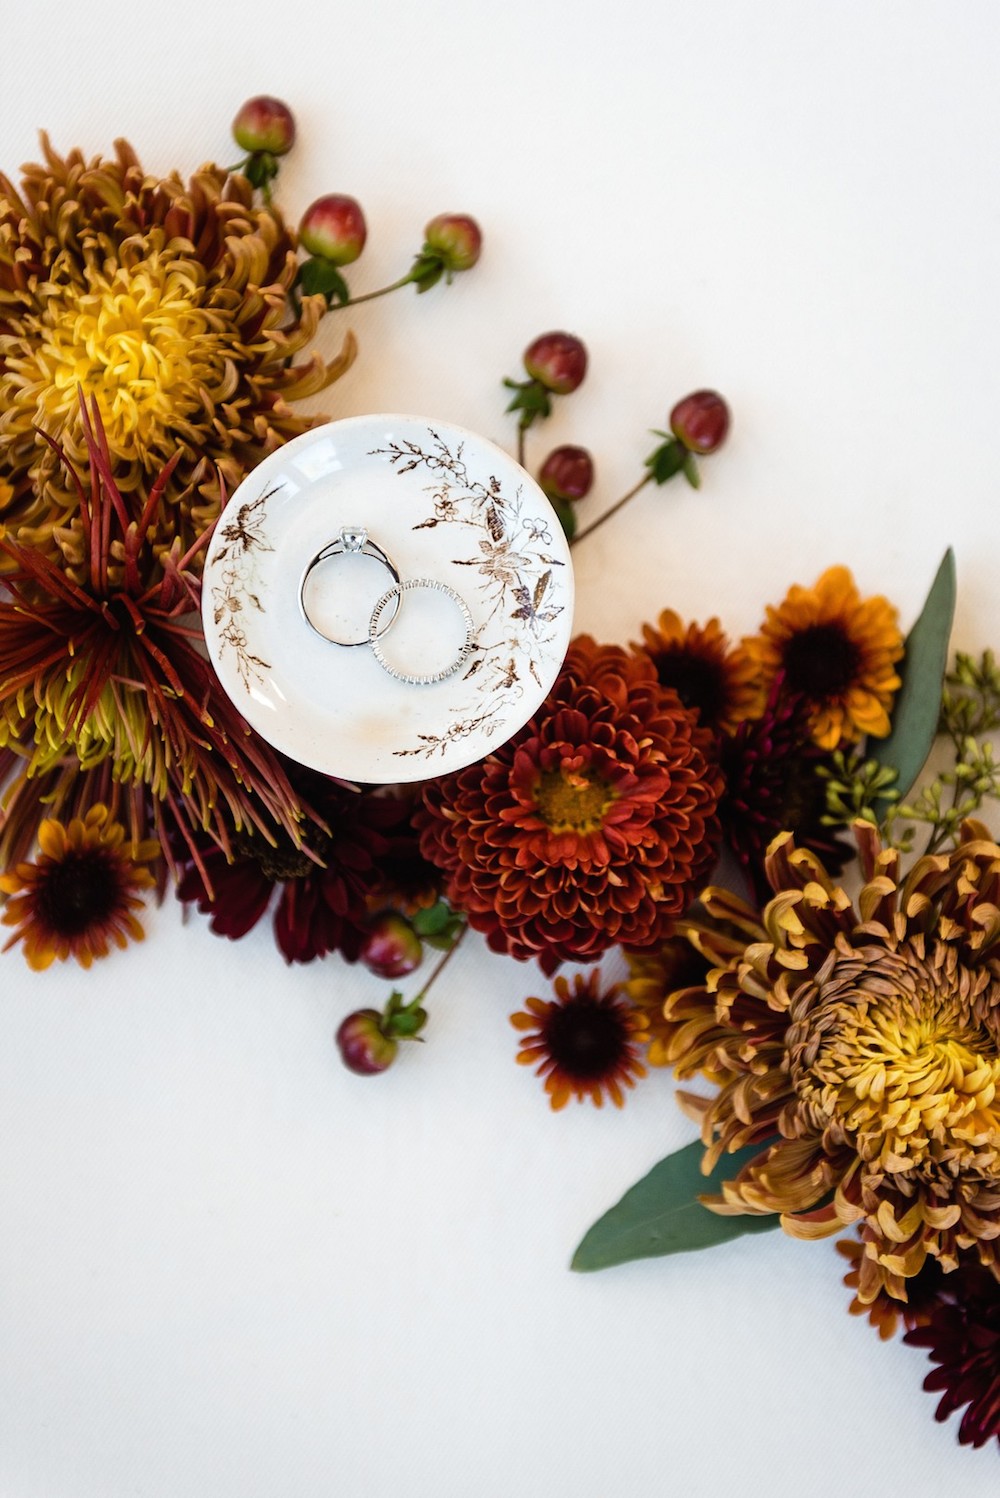 rings in ring dish with flowers in a flat lay